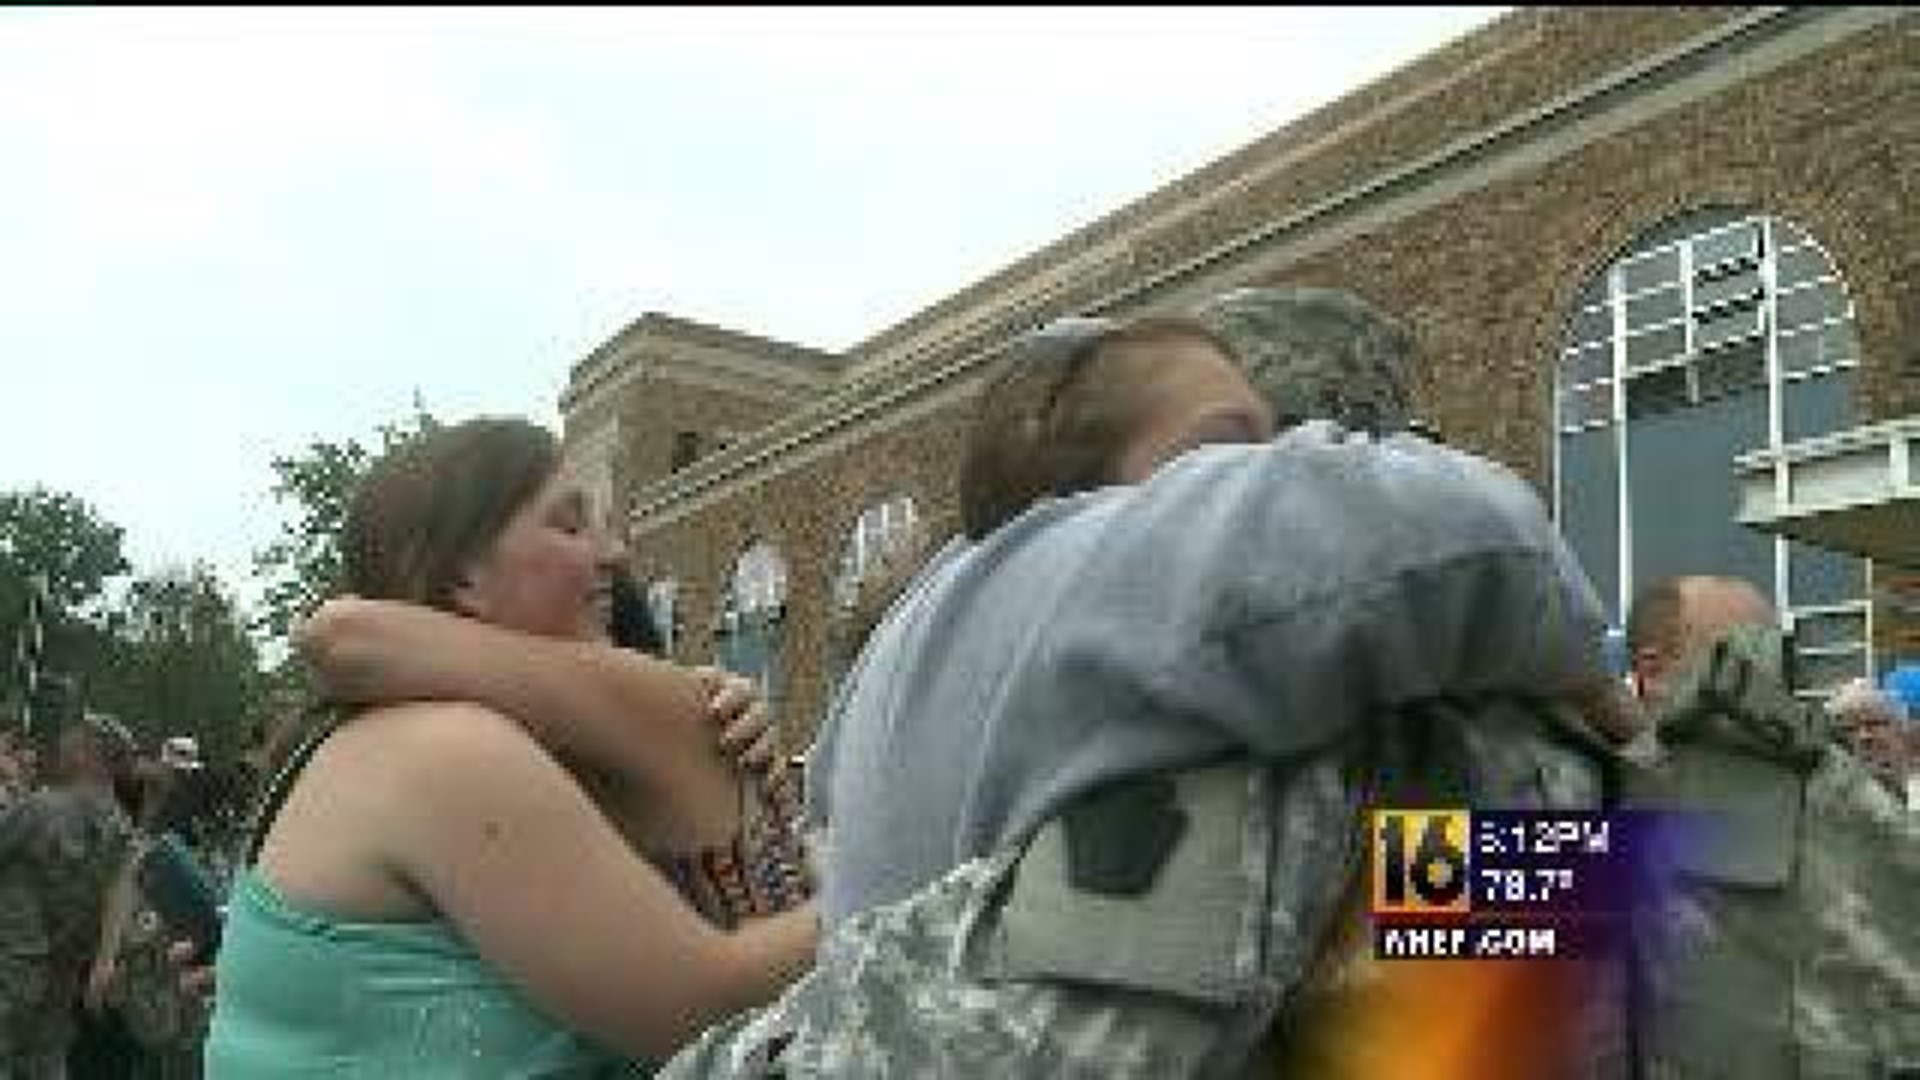 An Emotional Homecoming at the 109th Armory